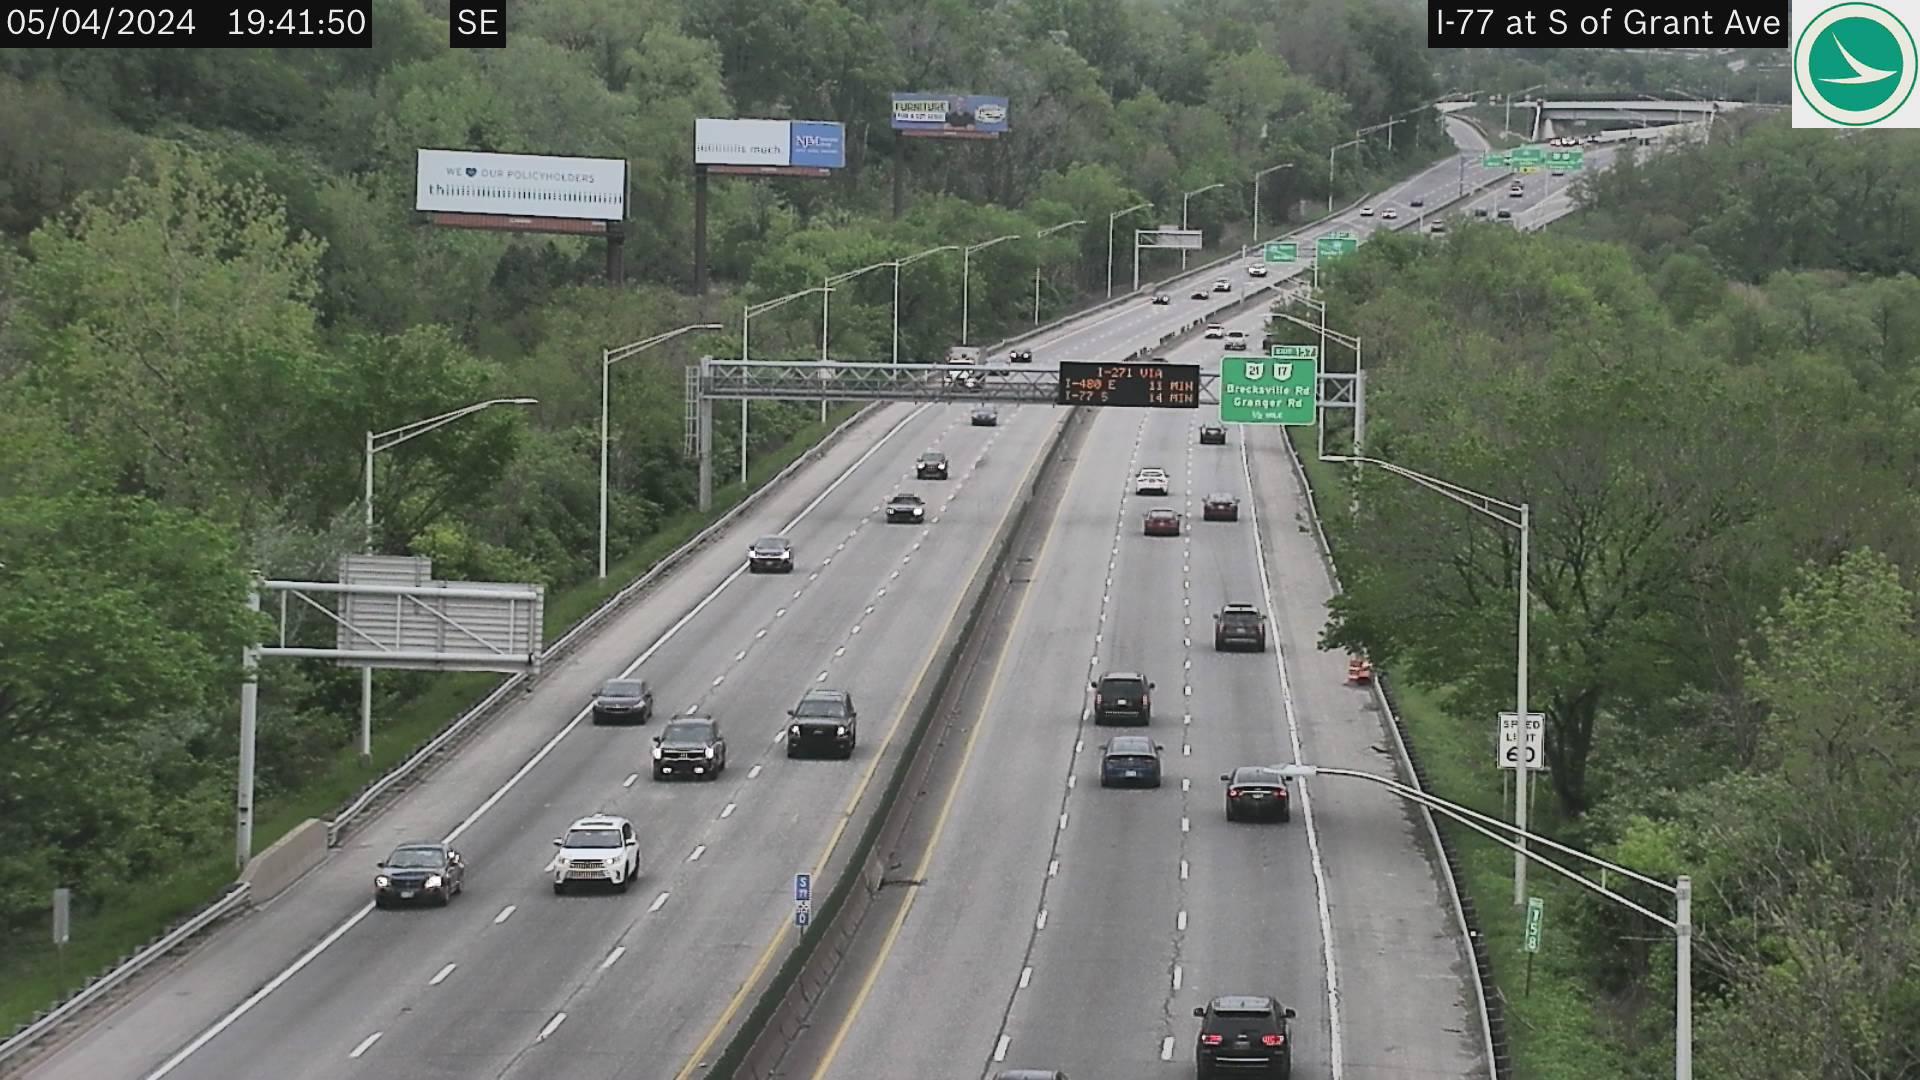 Cuyahoga Heights: I-77 at S of Grant Ave Traffic Camera